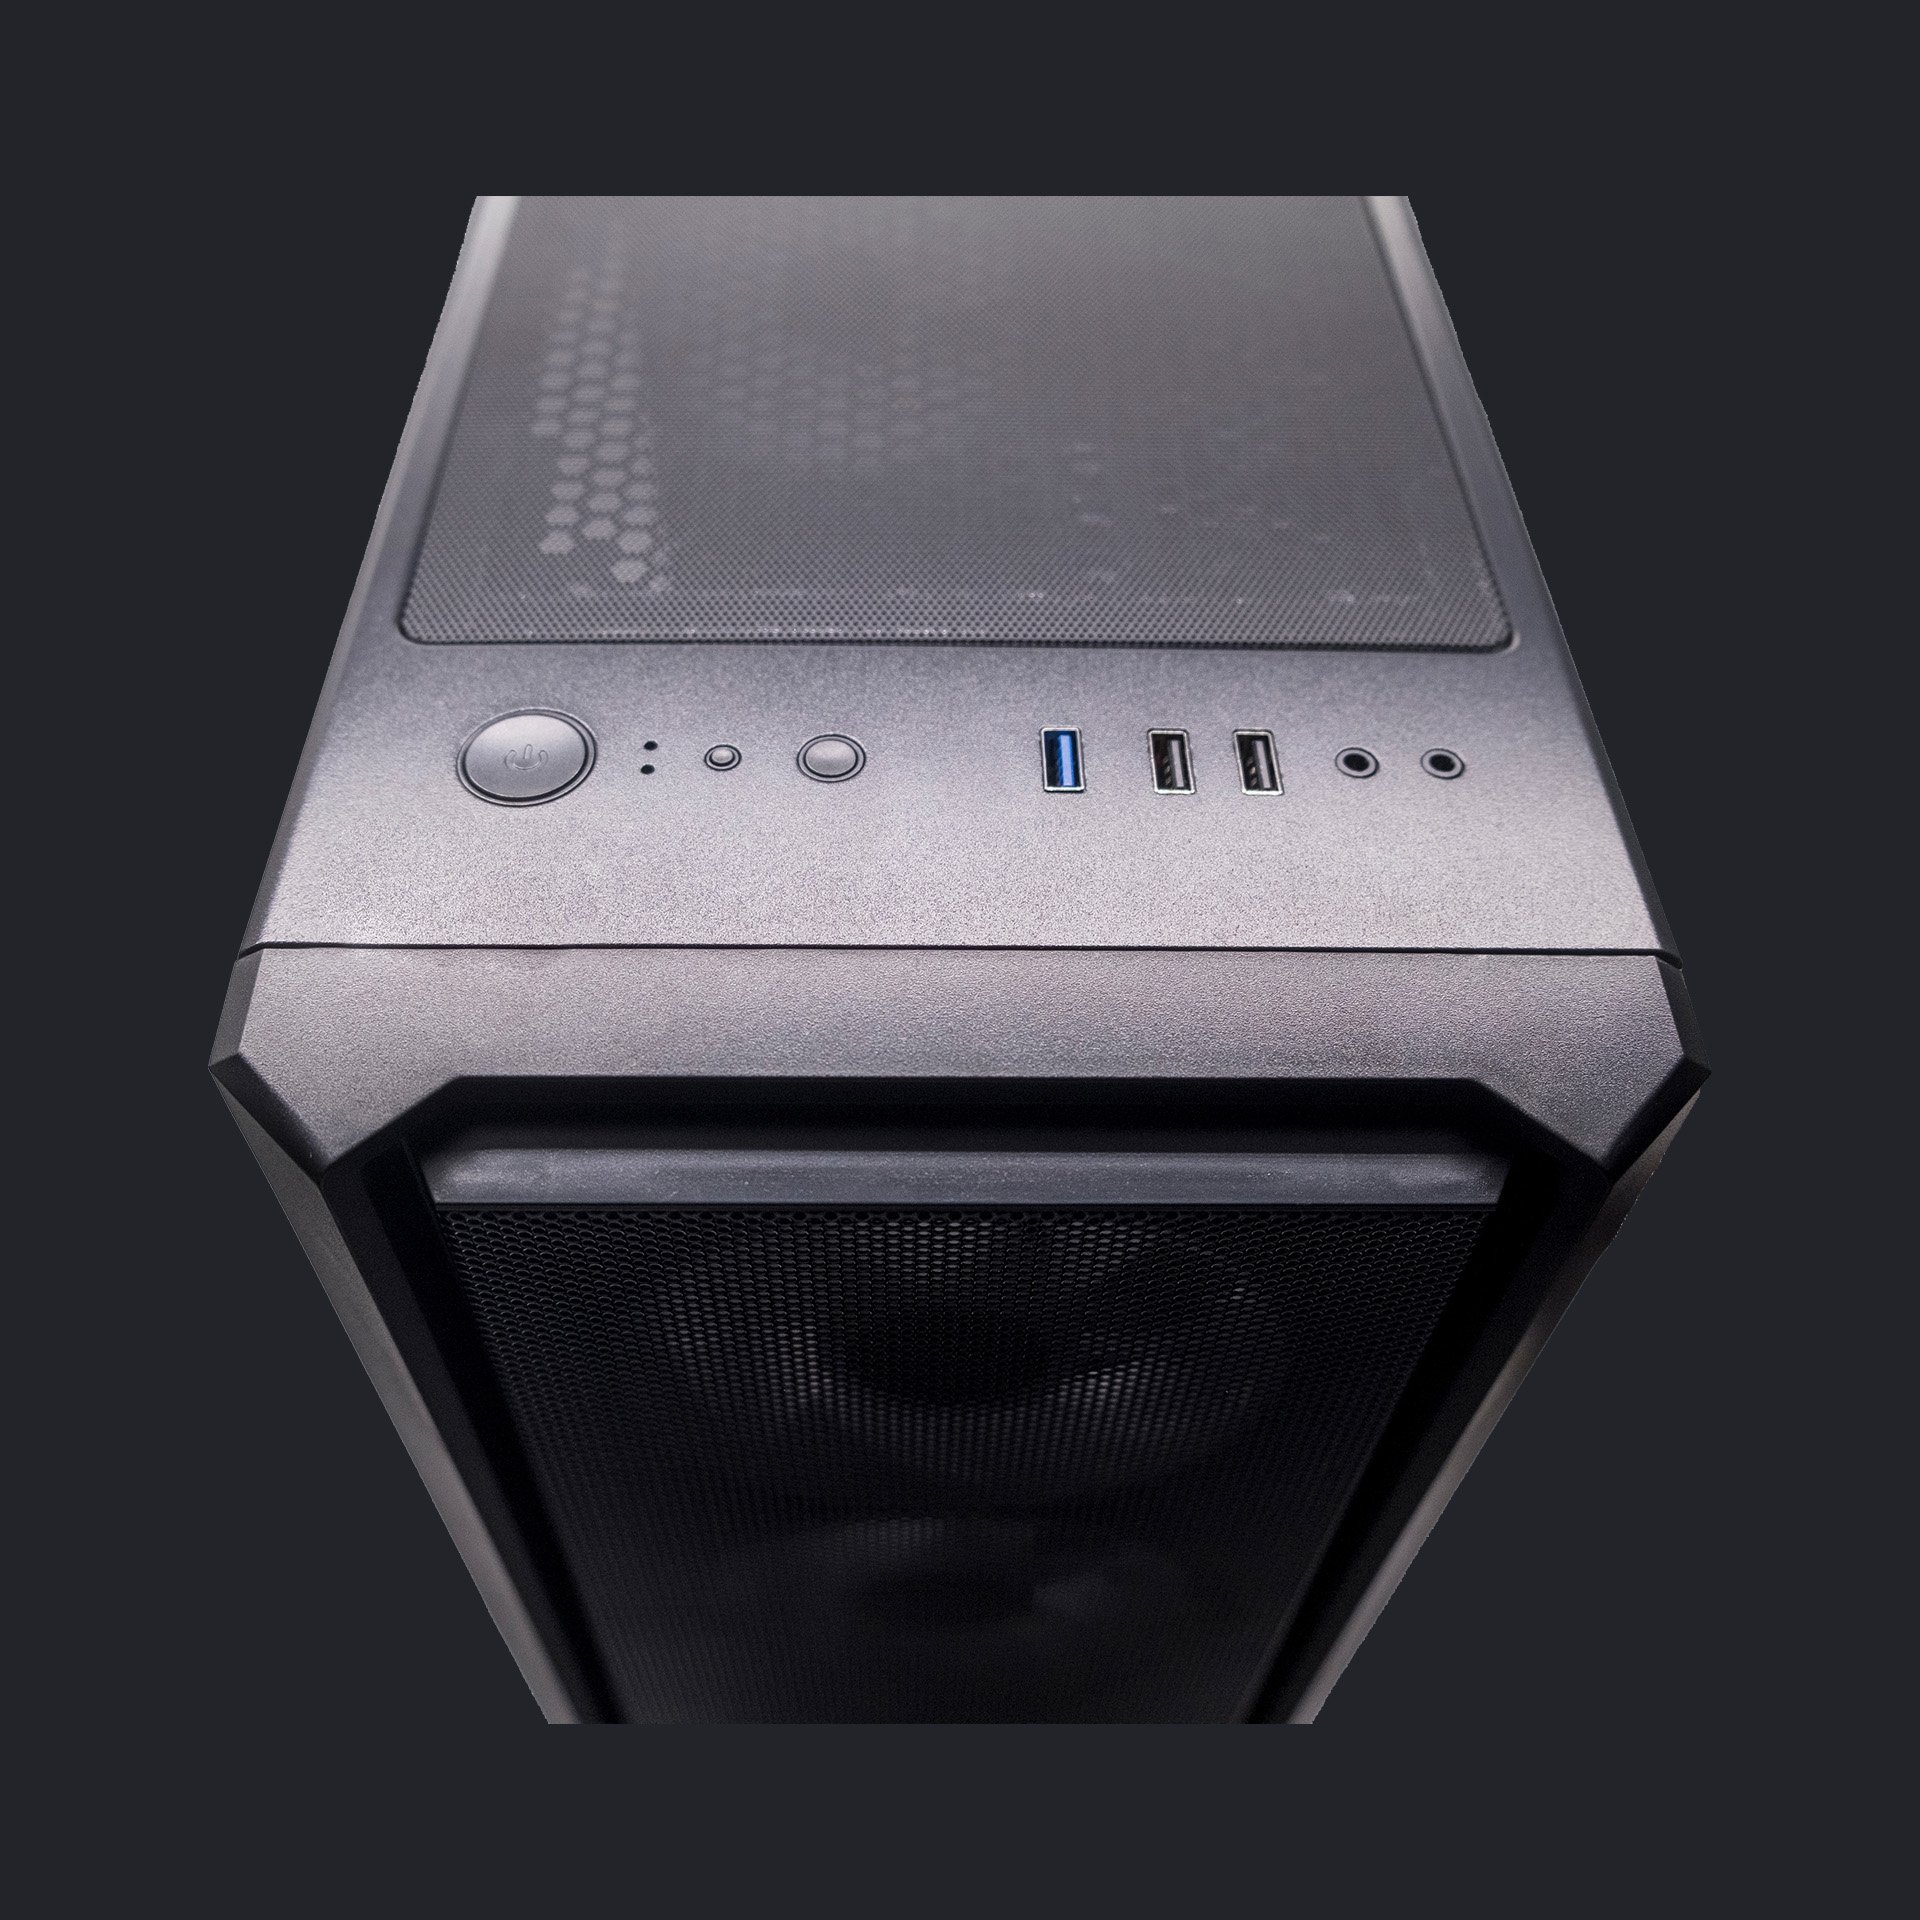 CHASER C51312 Gaming PC